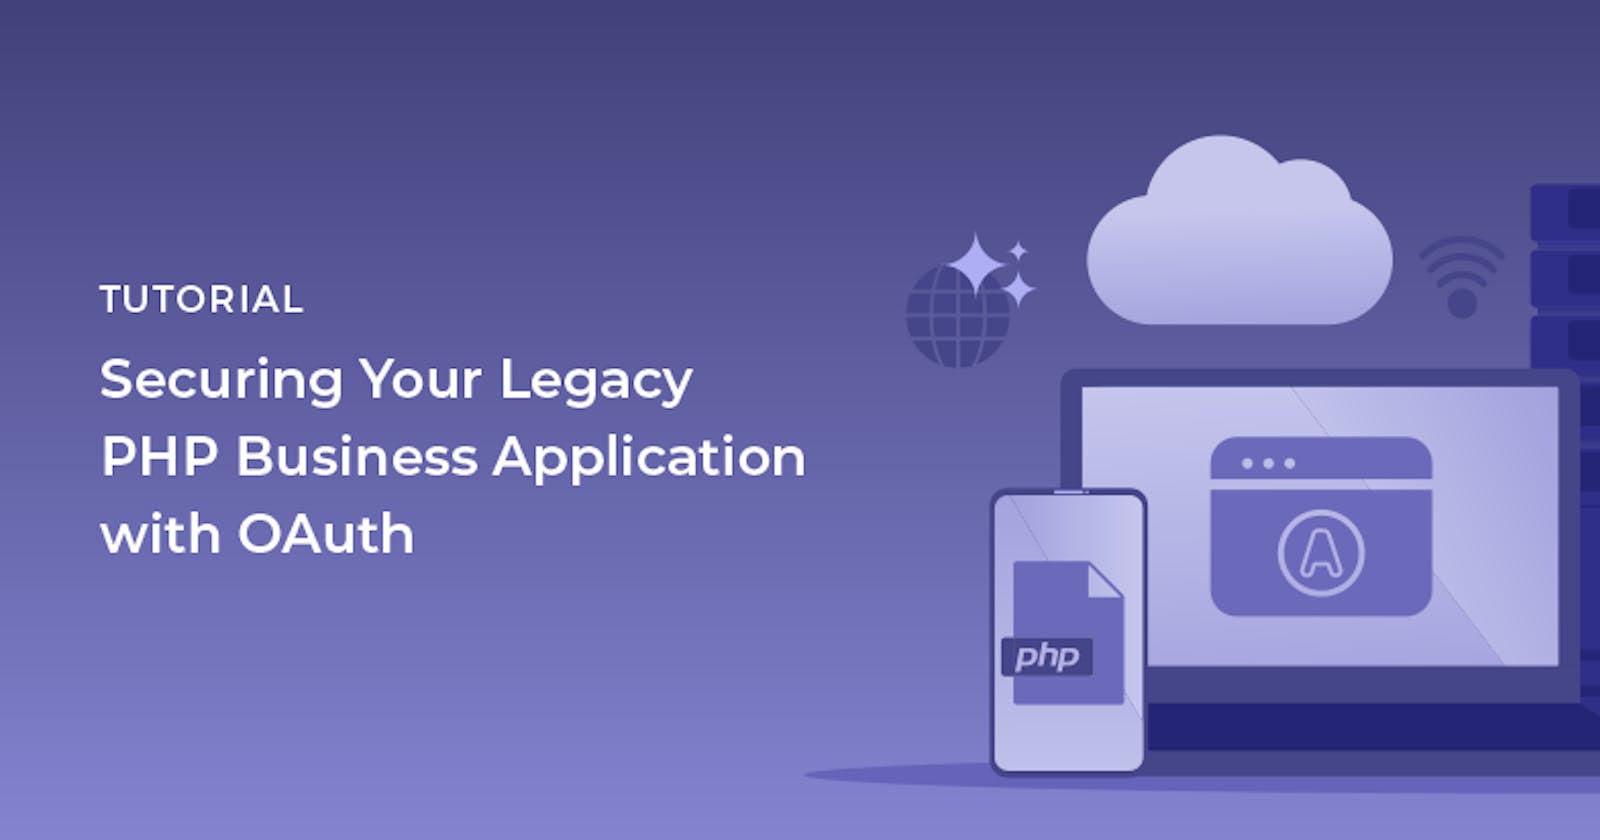 Securing your legacy PHP business application with OAuth